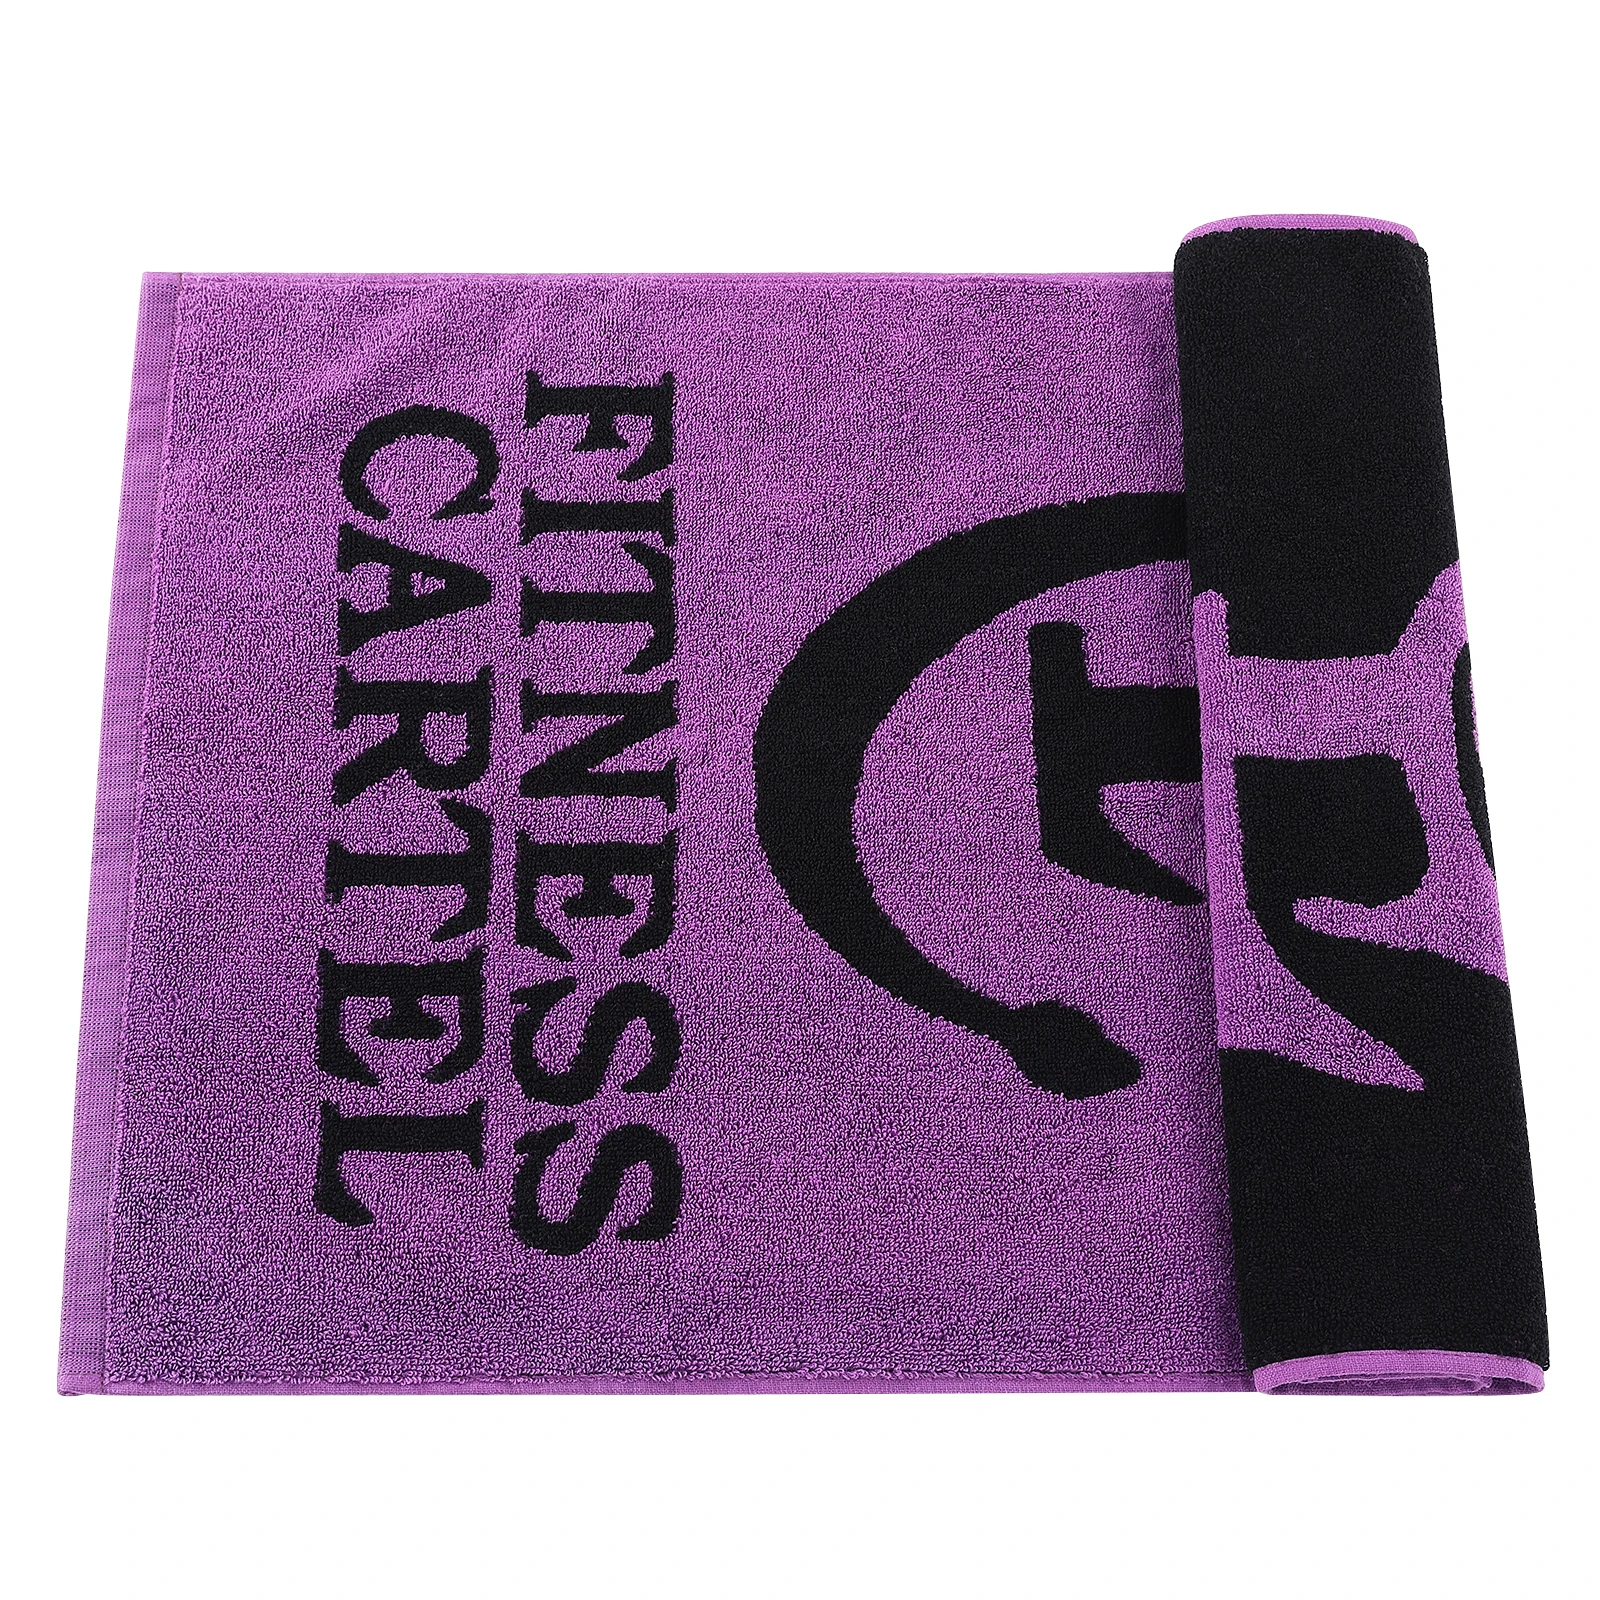 Personal Design Soft Super Absorbent 2-Sided Printing Workout Fitness Gym Sport Towel